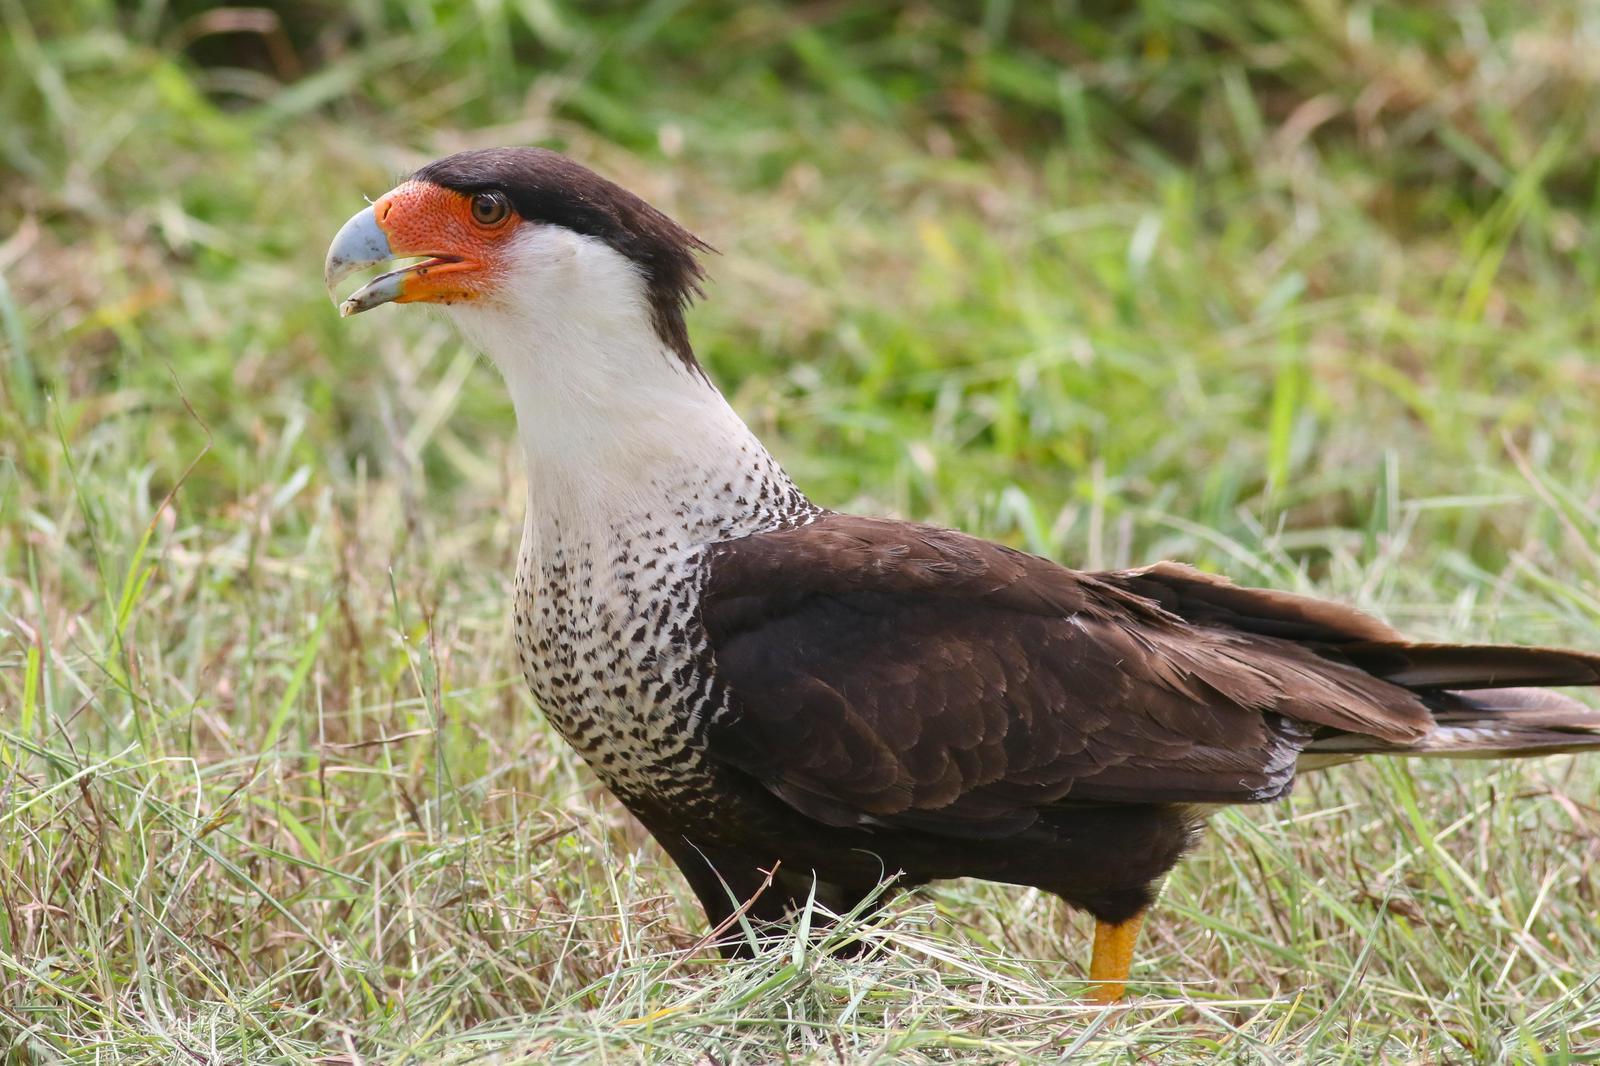 Crested Caracara Photo by Tom Ford-Hutchinson